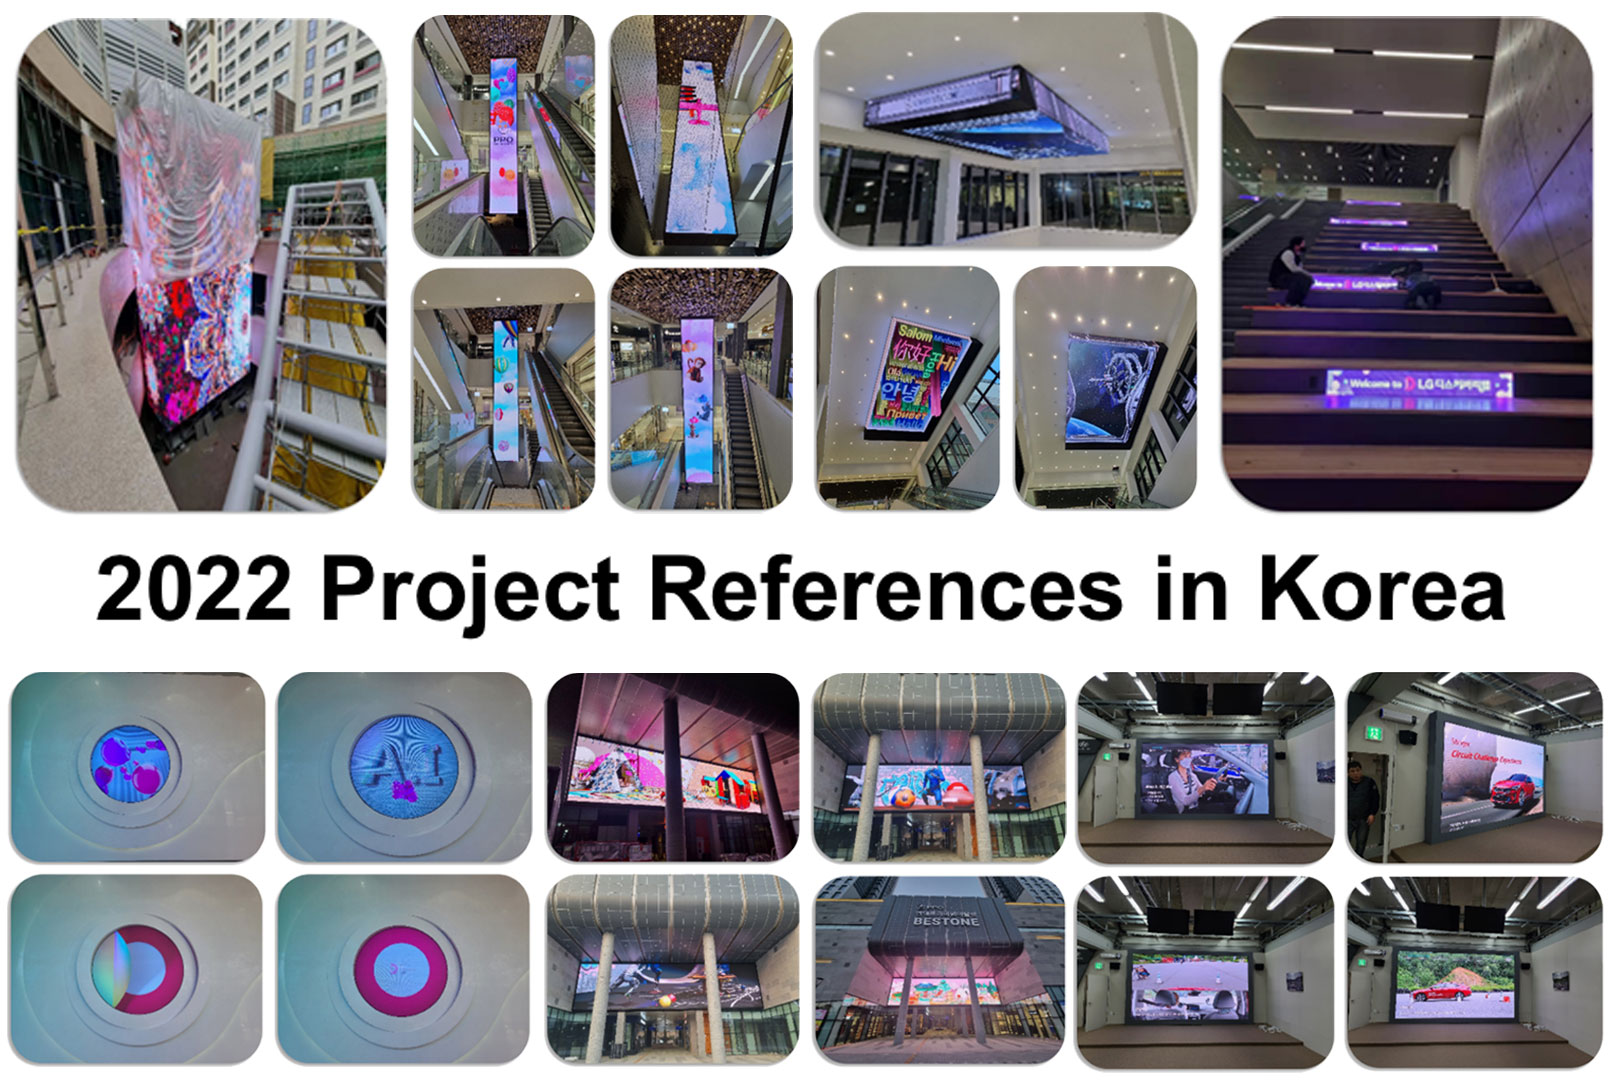 2022 Project References in Korea